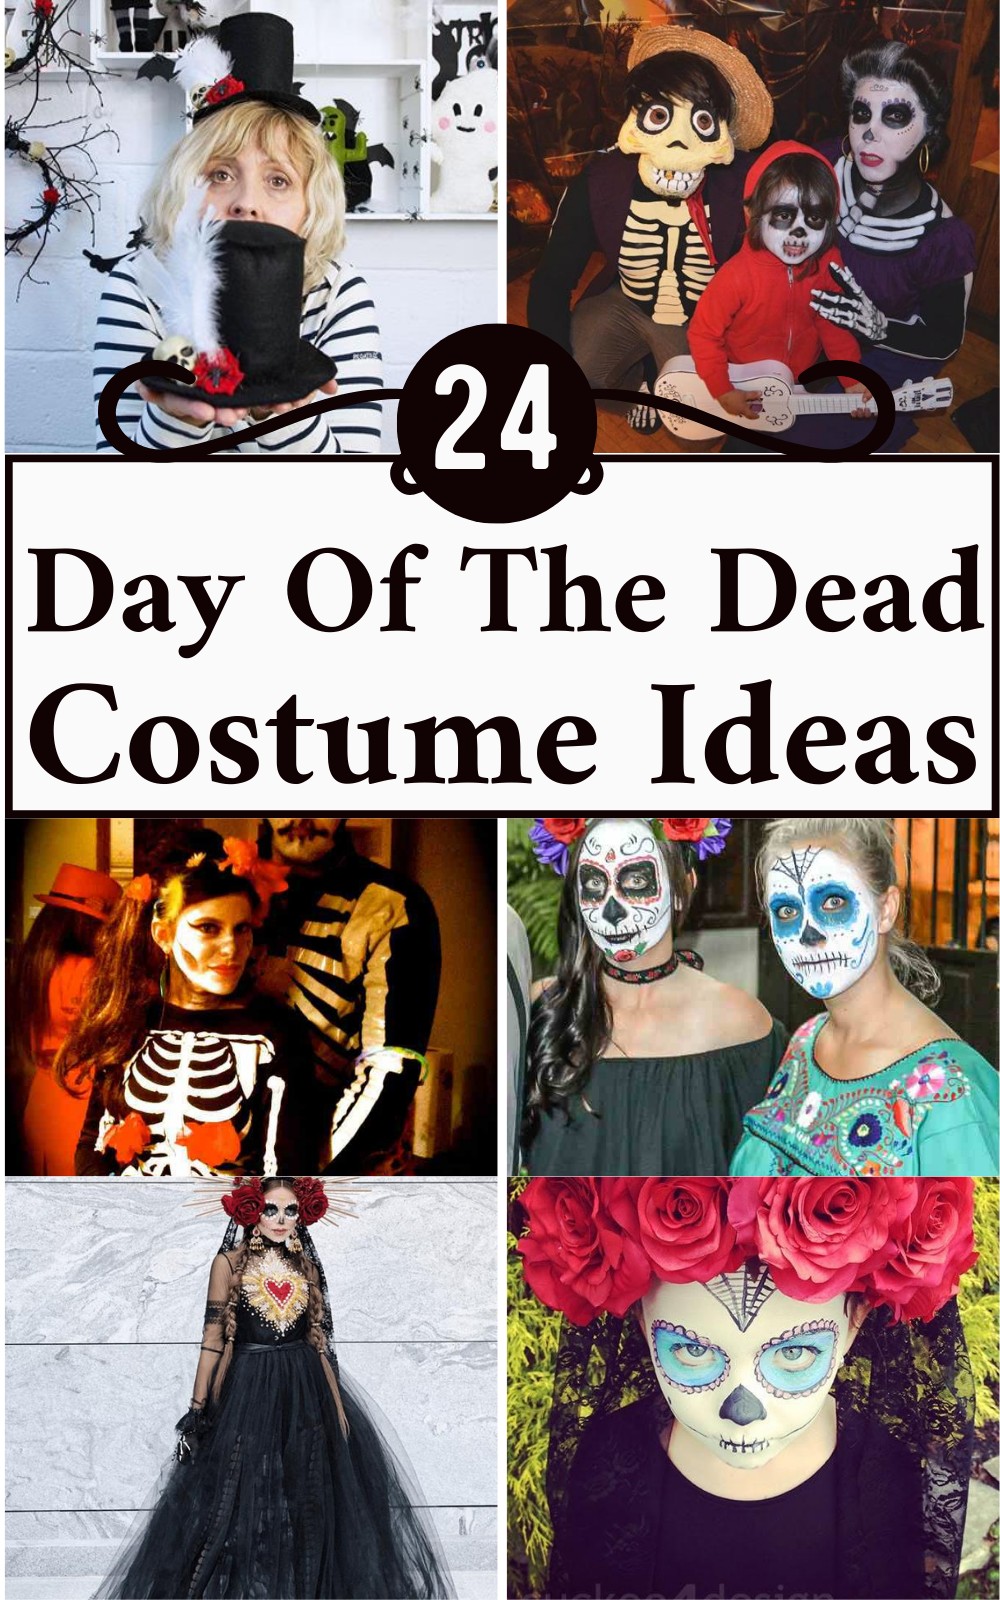 24 DIY Day Of The Dead Costume Ideas